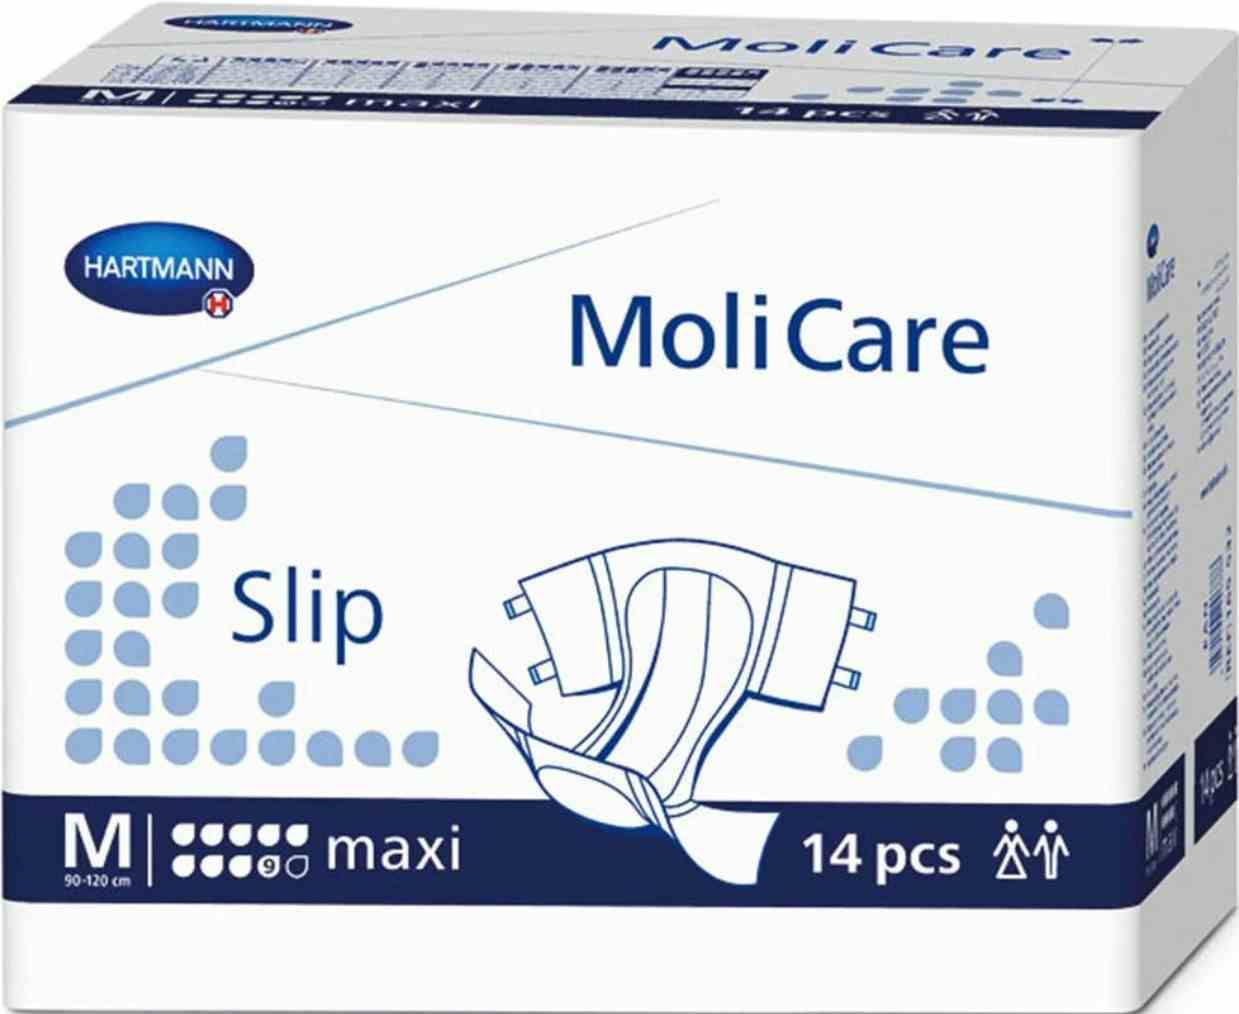 MoliCare Slip Diapers with Tabs, Maxi